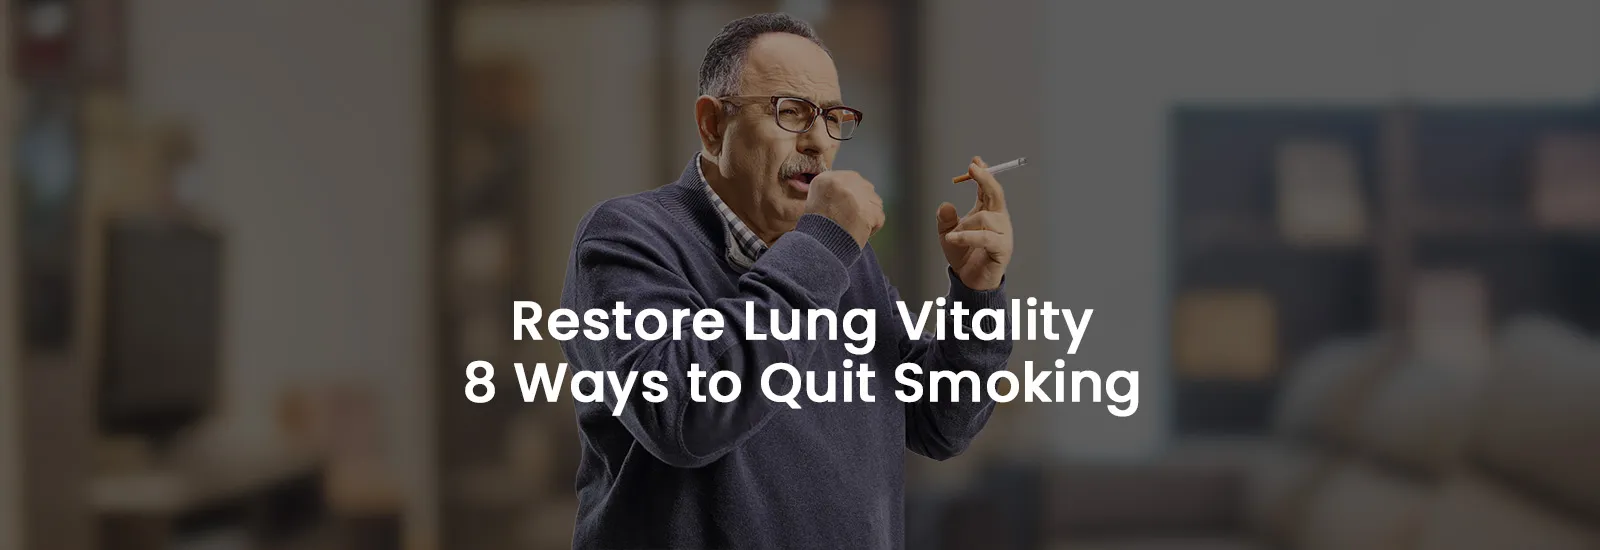 Restore Lung Vitality: 8 Ways to Quit Smoking | Banner Image